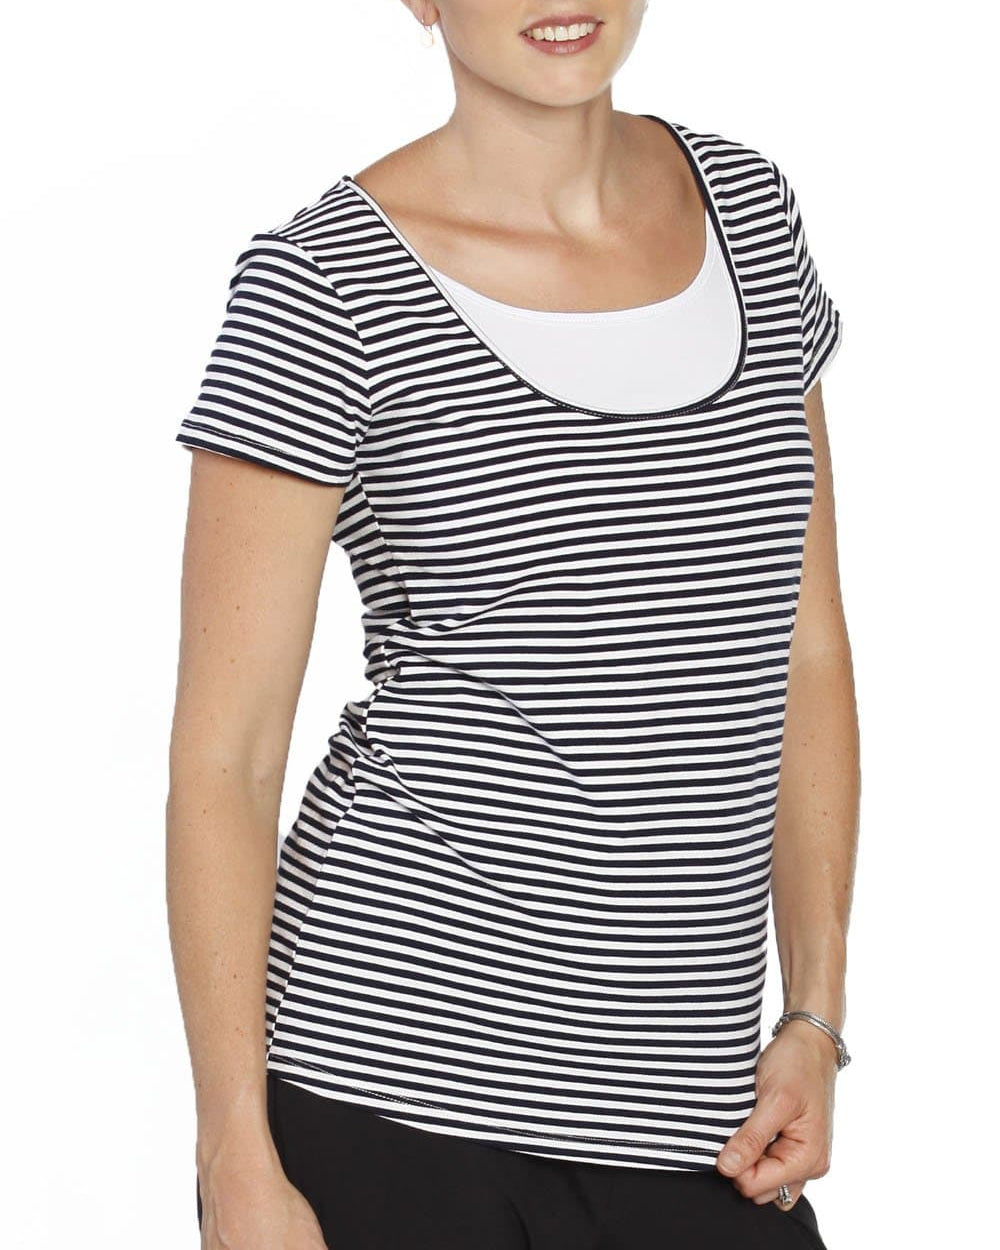 Breastfeeding Short Sleeve Tee Top - Black & White Stripes - Angel Maternity - Maternity clothes - shop online (121887457301)